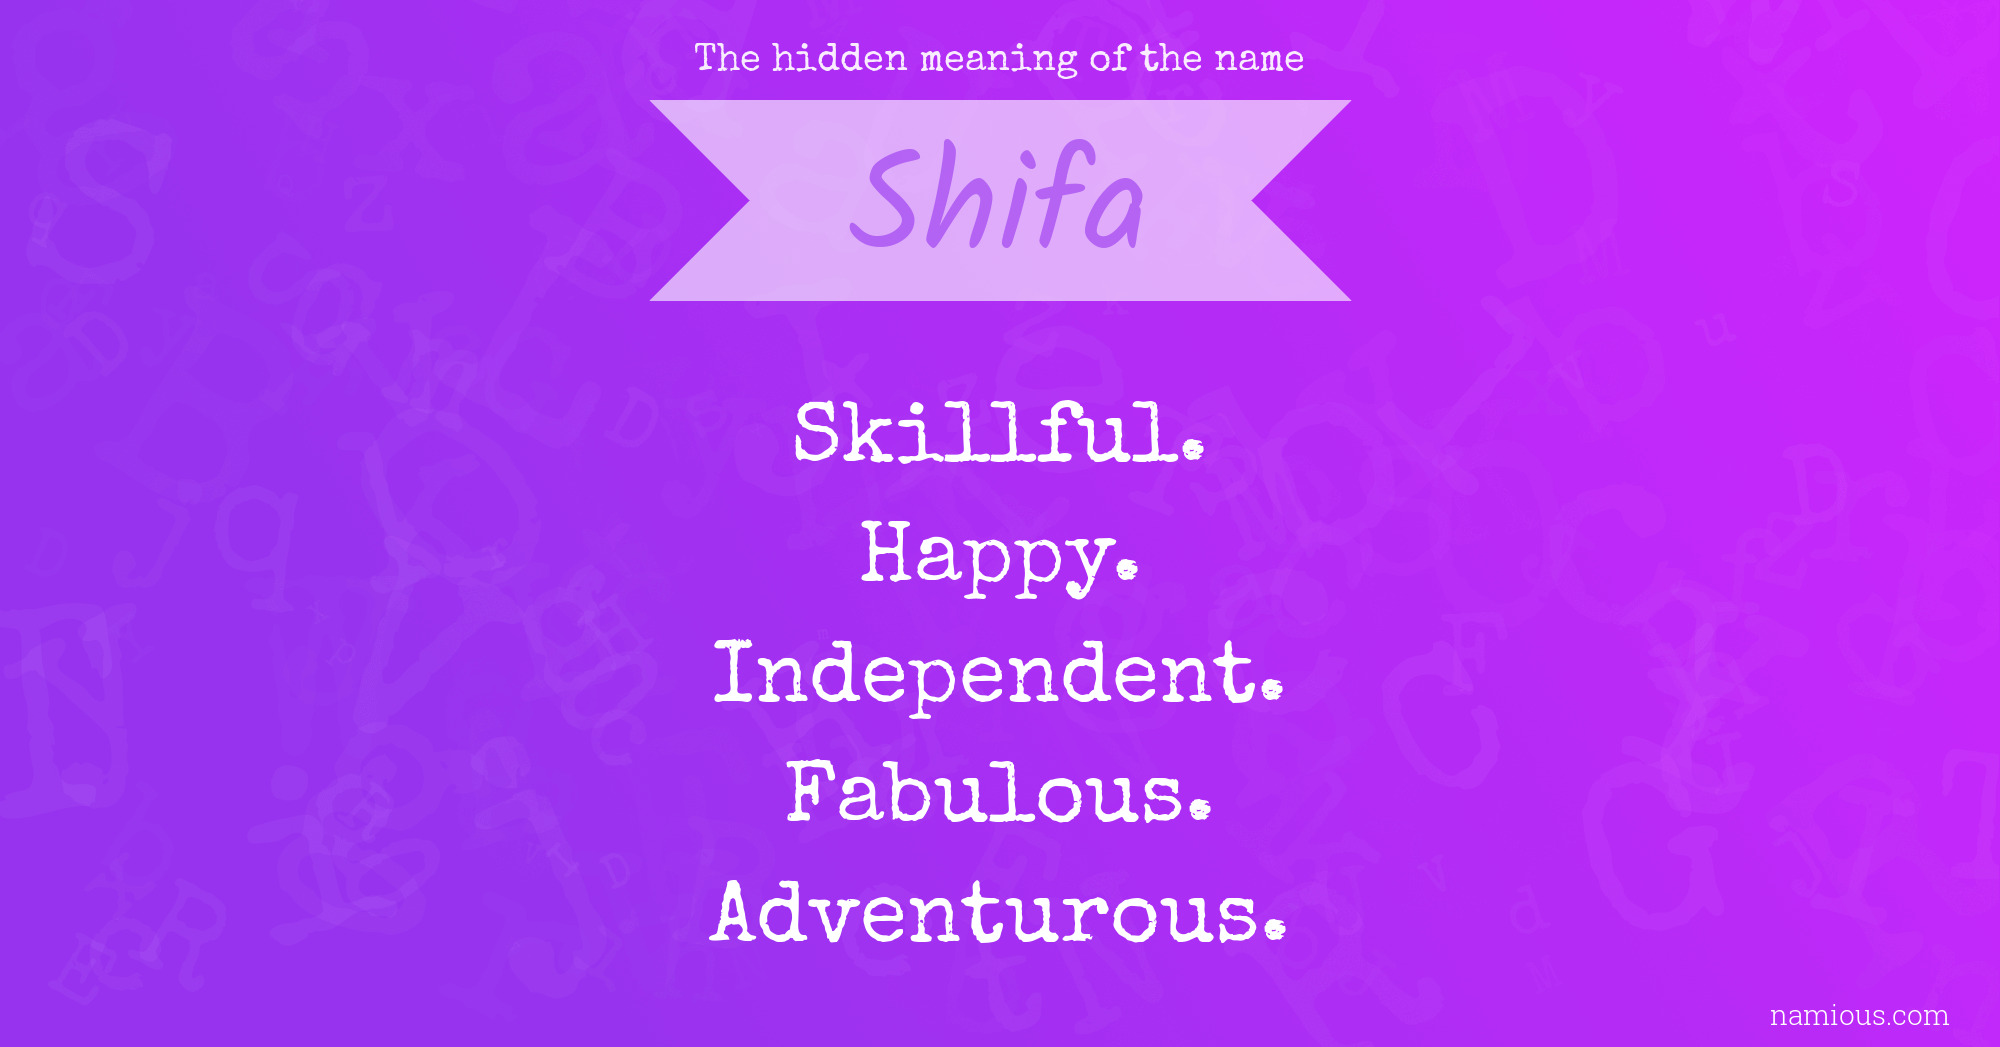 The hidden meaning of the name Shifa